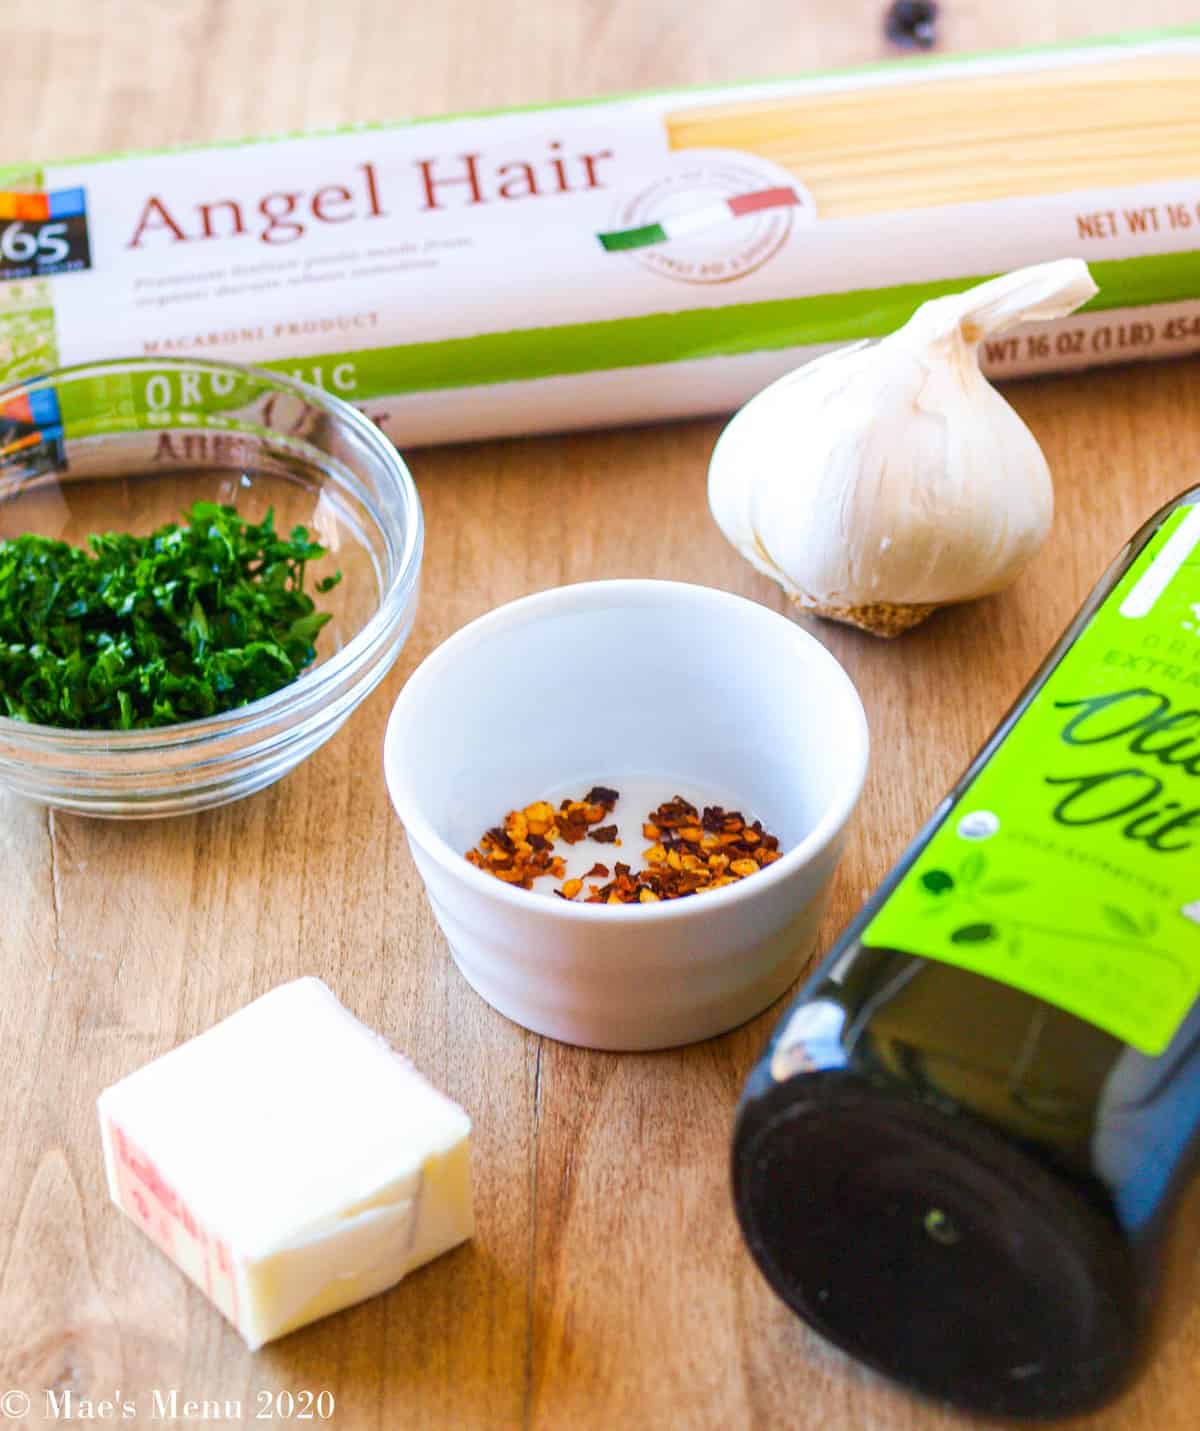 all the ingredients for garlic angel hair pasta on a wooden table: angel hair, chopped parsley, garlic, red pepper flakes, olive oil, and butter